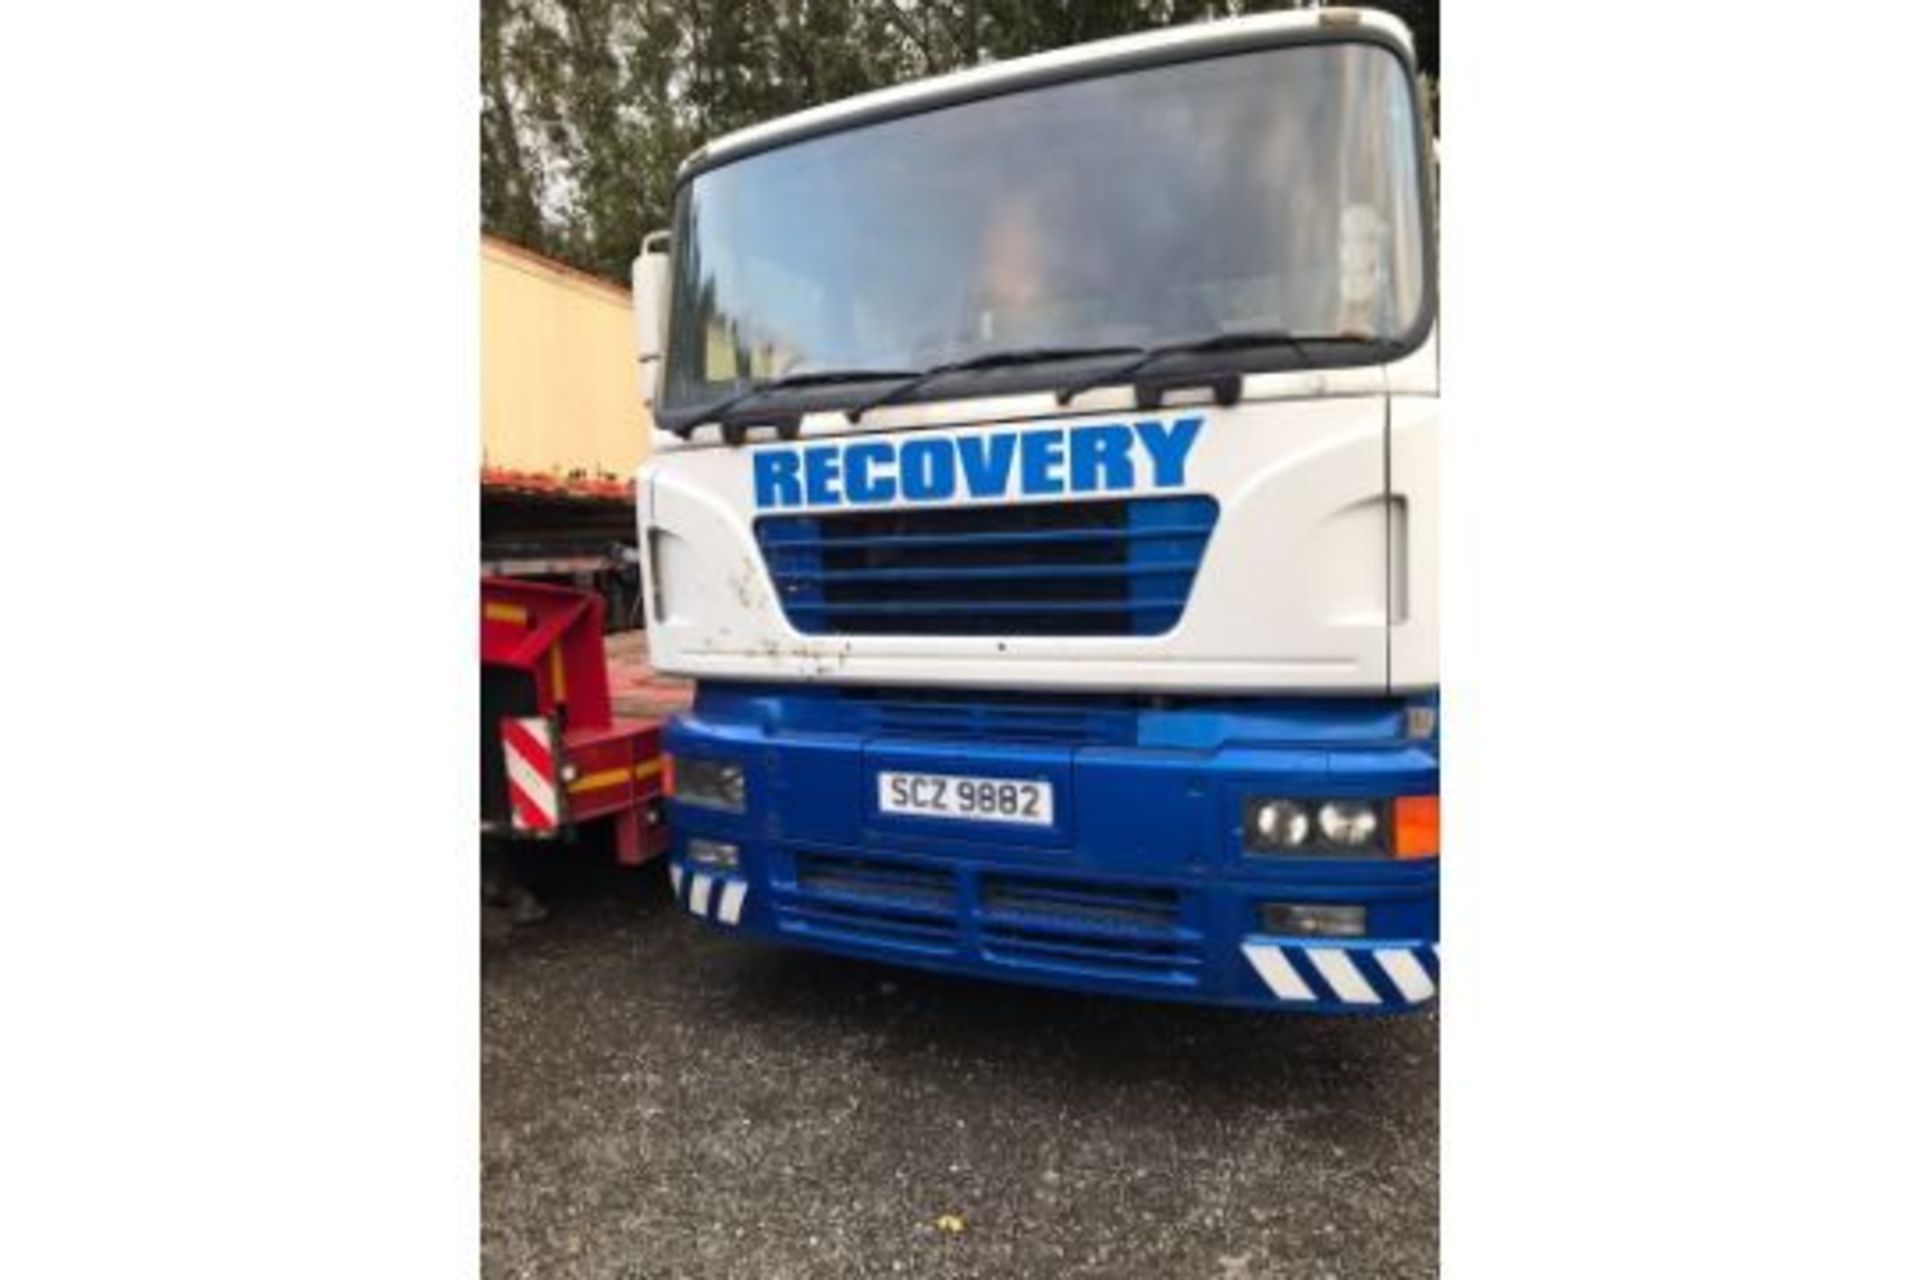 2001 RECOVERY TRUCK - Image 6 of 15